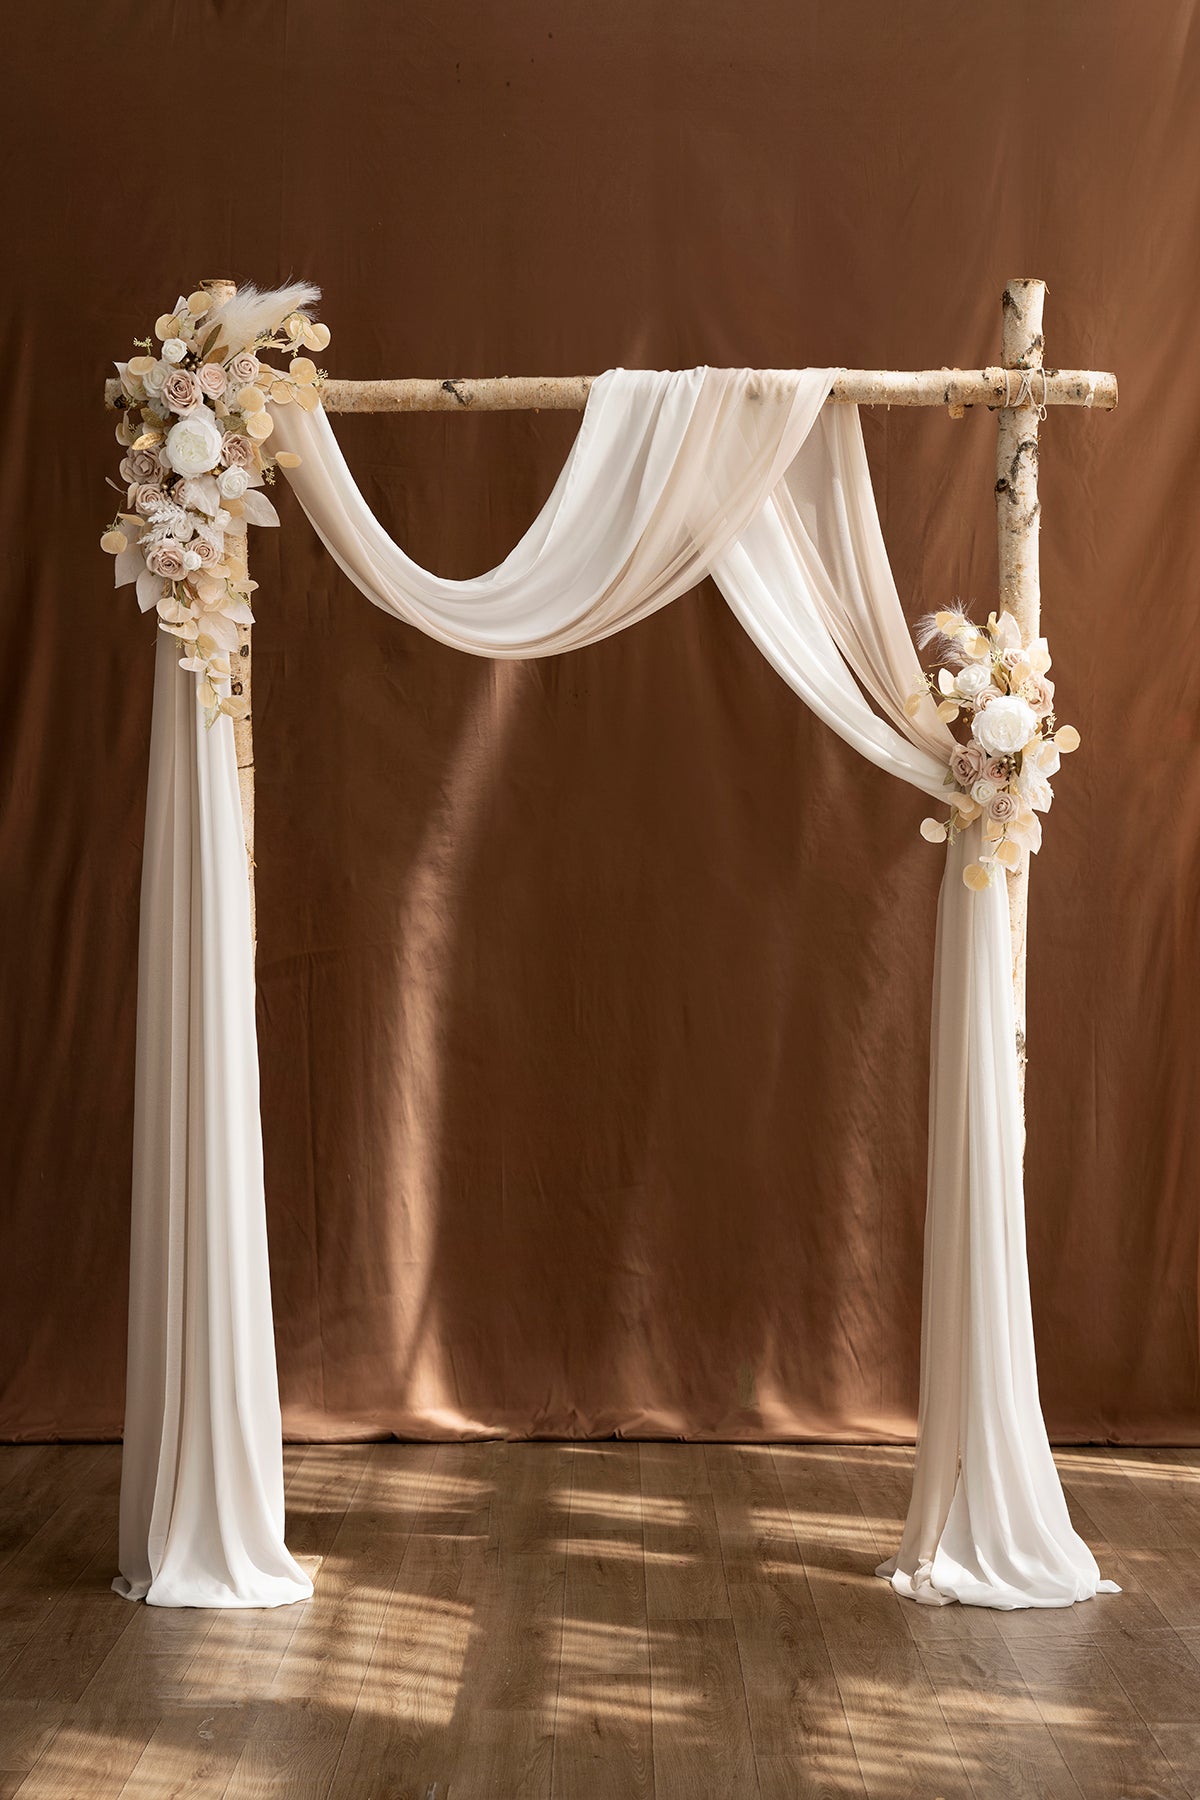 Flower Arch Decor with Drapes in White & Beige | Clearance